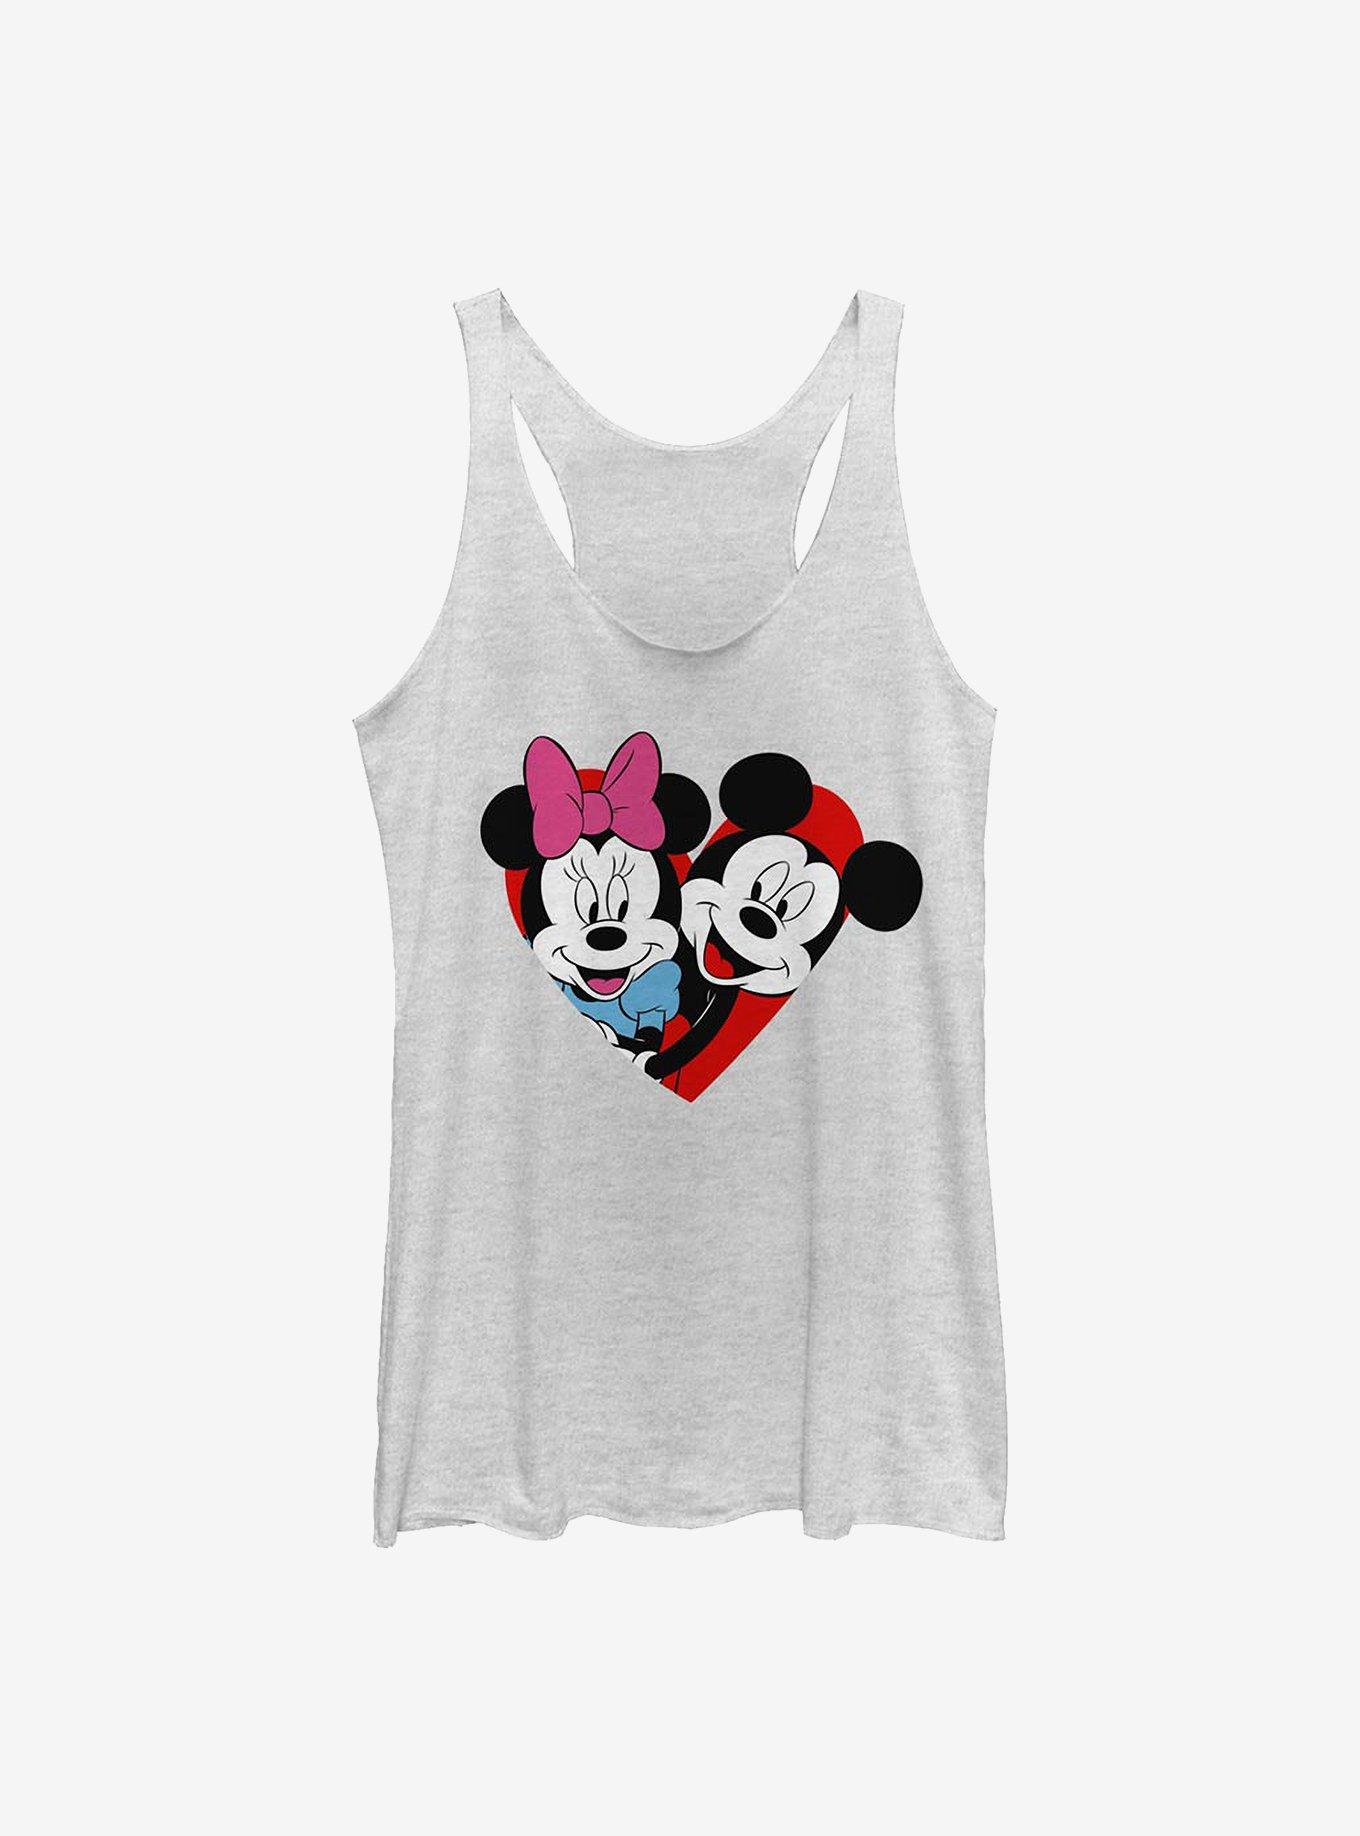 Disney Mickey Mouse & Minnie Mouse Heart Girls Tank Top, WHITE HTR, hi-res